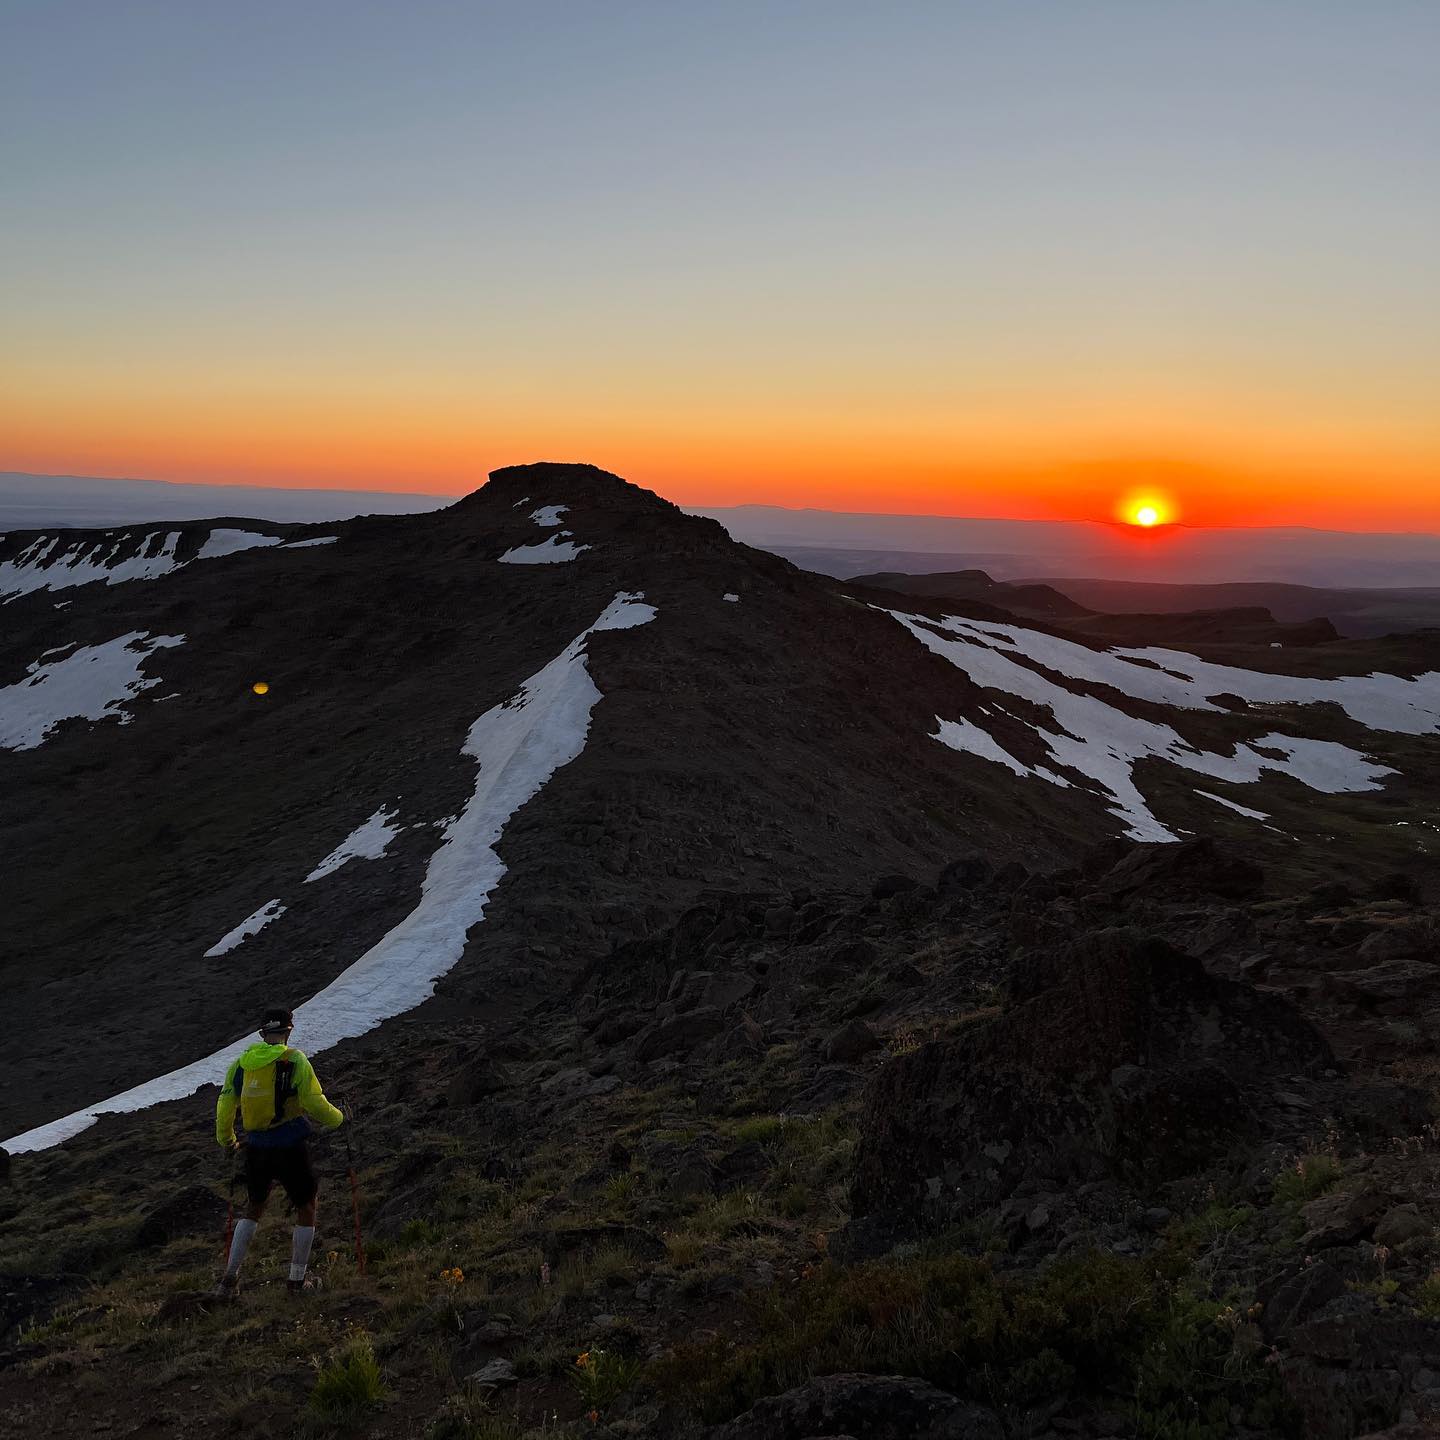 Supporting Max King's FKT on Steens Mountain